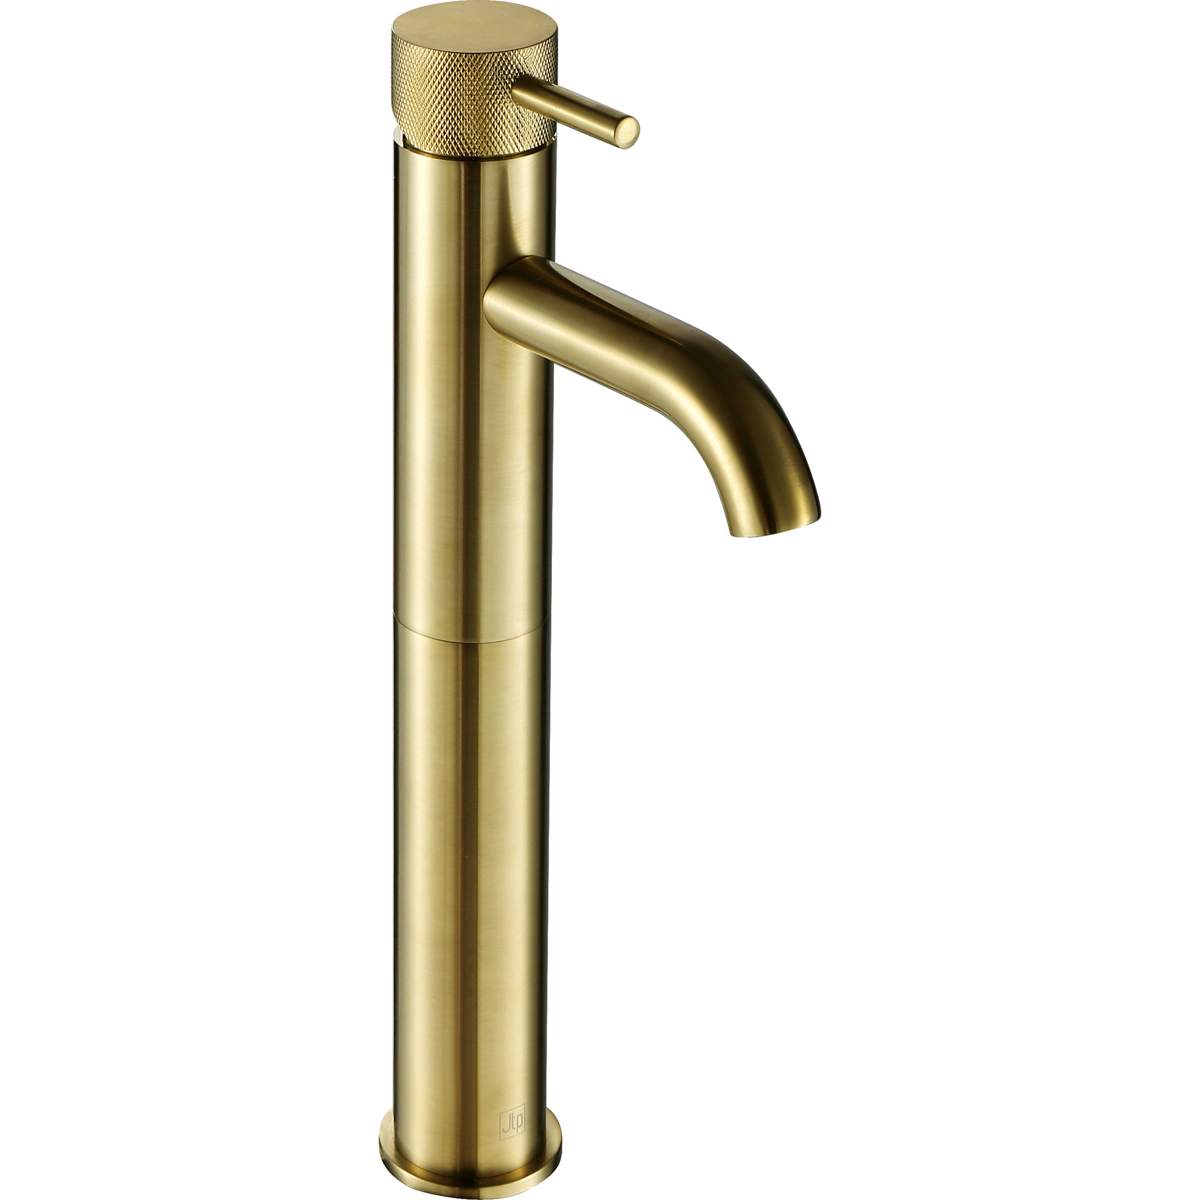 JTP Vos Brushed Brass Single Lever Tall Basin Mixer (DH23009ABBR)